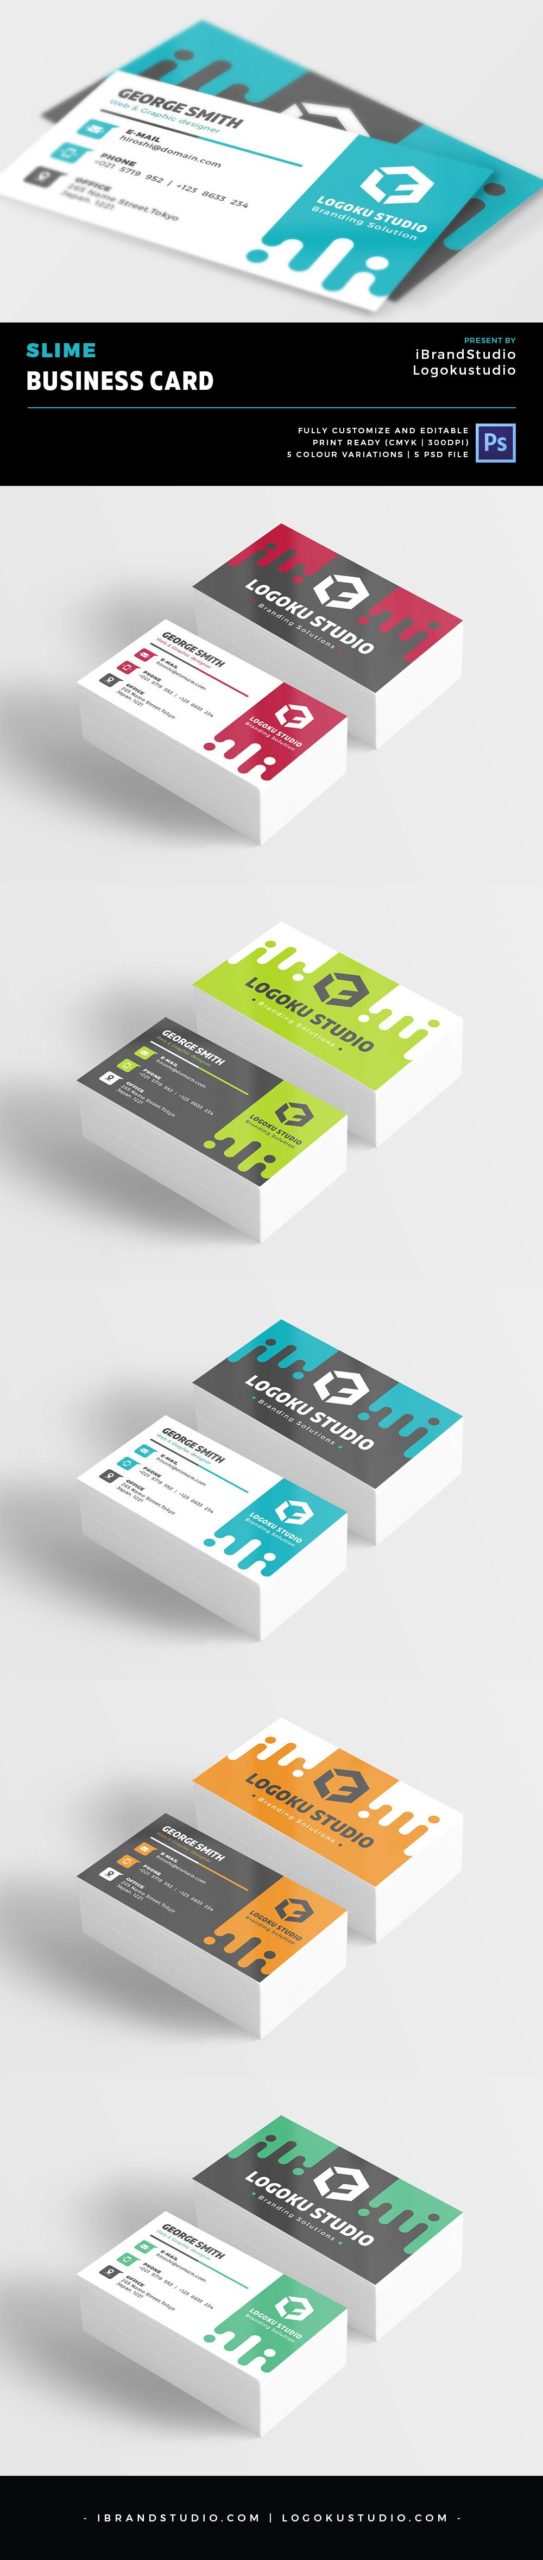 slime business cards 2